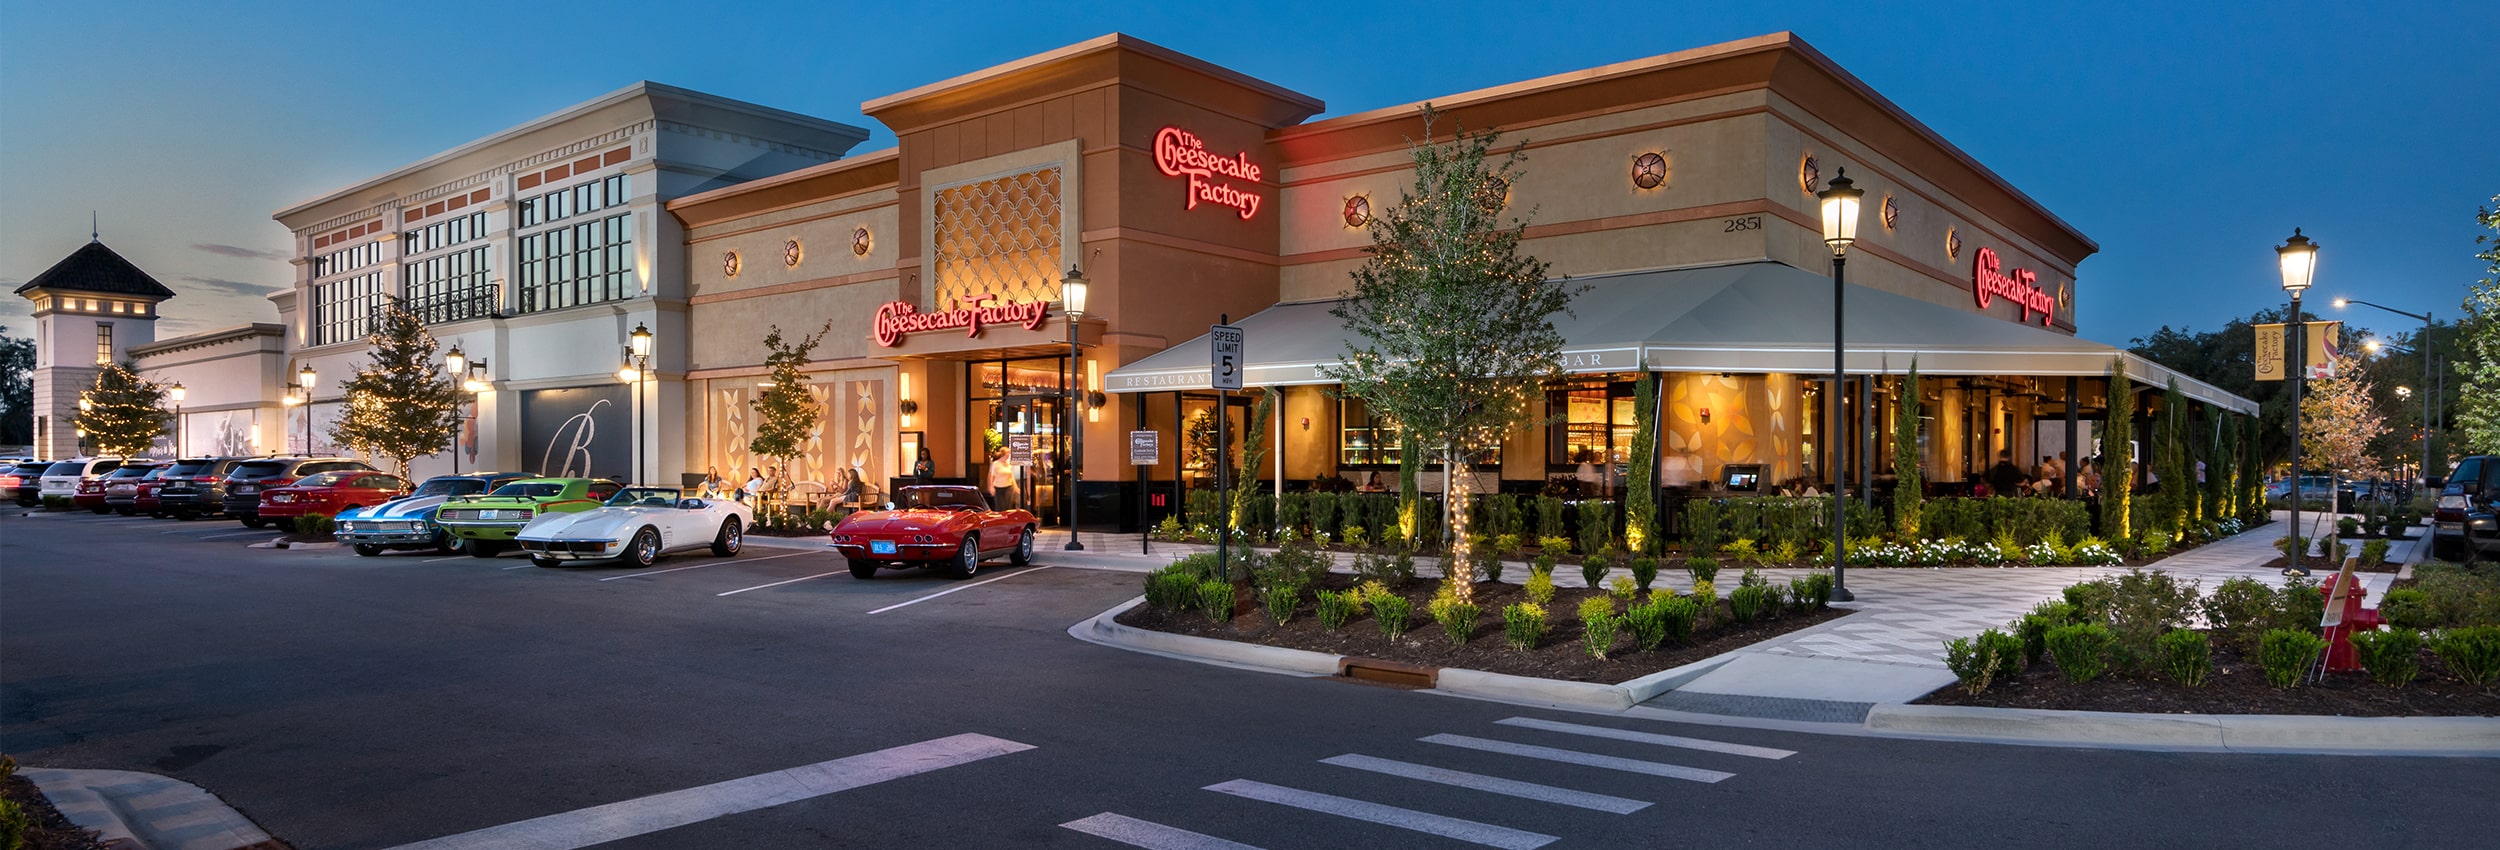 exterior view facing the cheesecake factory in butler plaza in gainesville florida